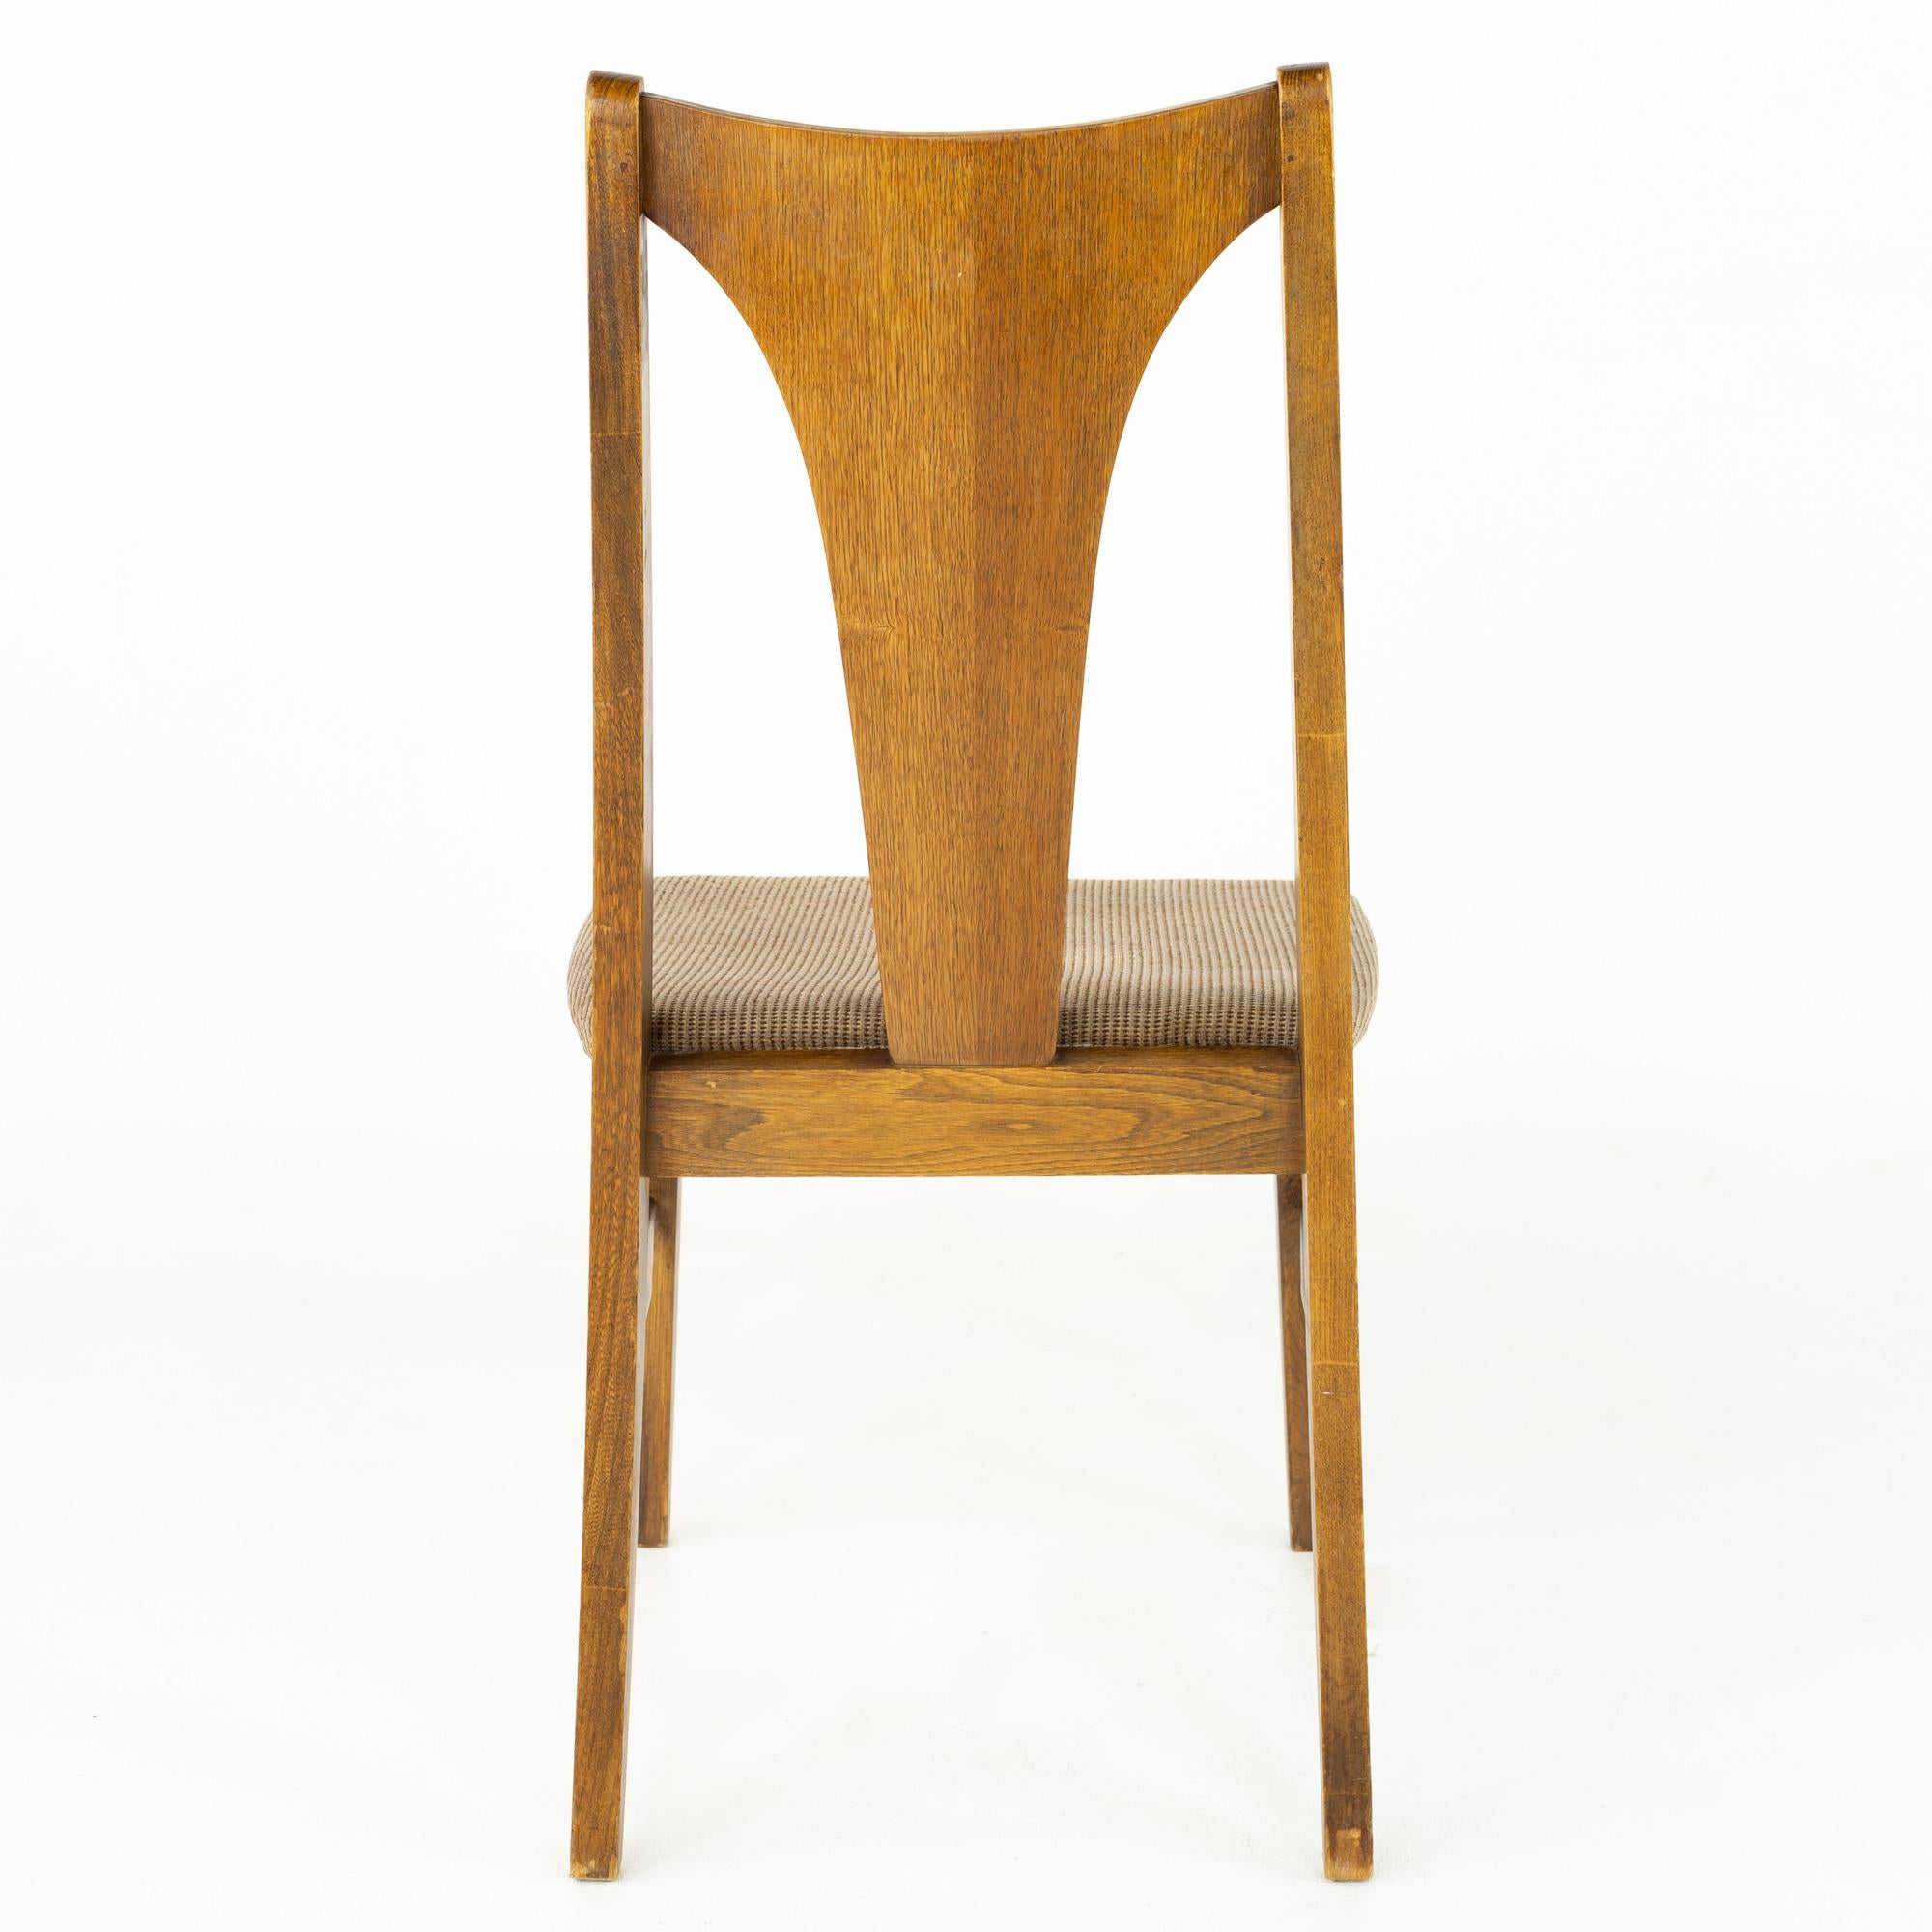 Kent Coffey Perspecta Mid Century Walnut Dining Chairs, Set of 6 For Sale 8